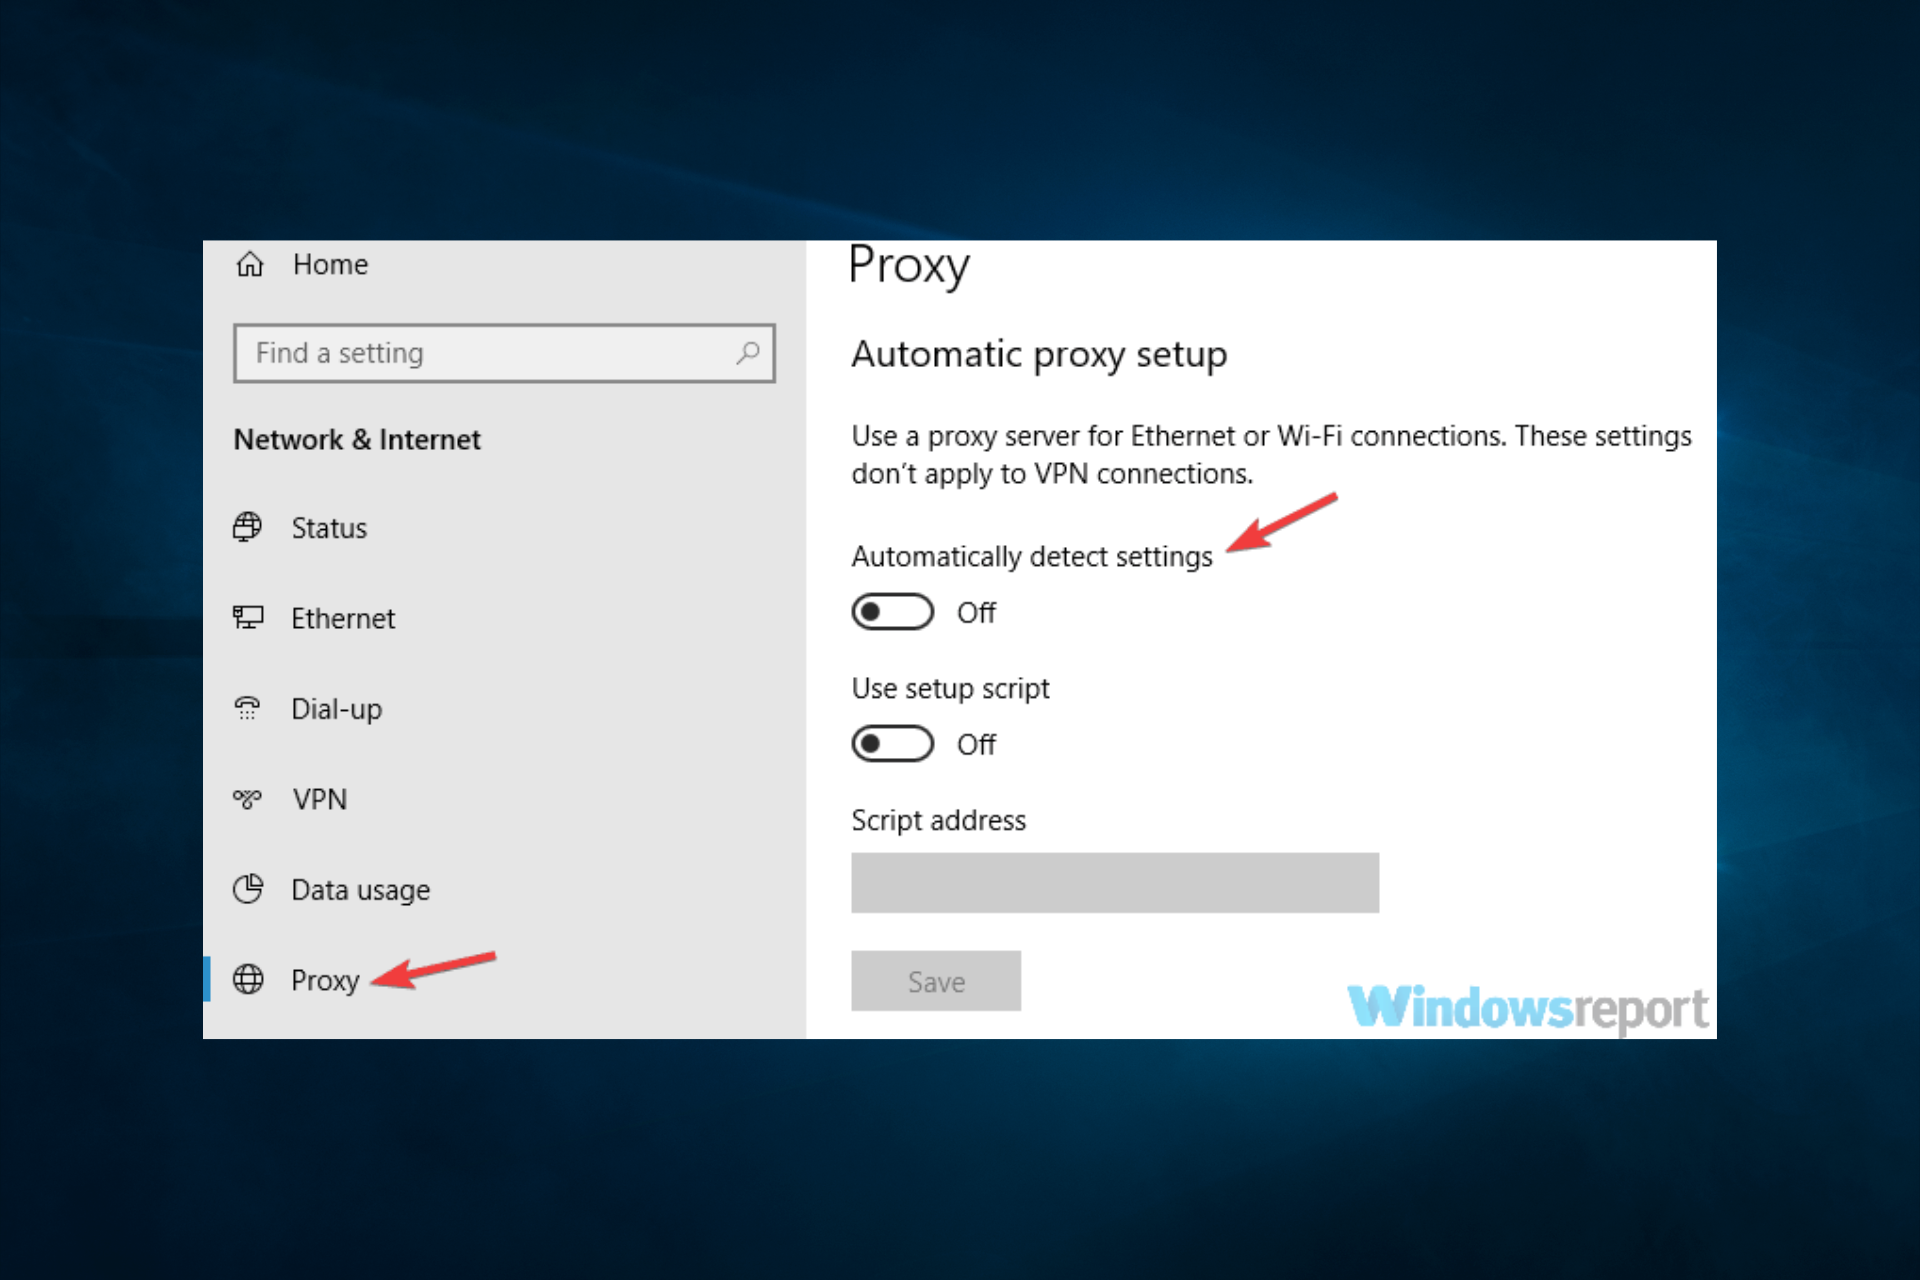 Proxy Server Keeps Turning on in Windows 10: Disable it now